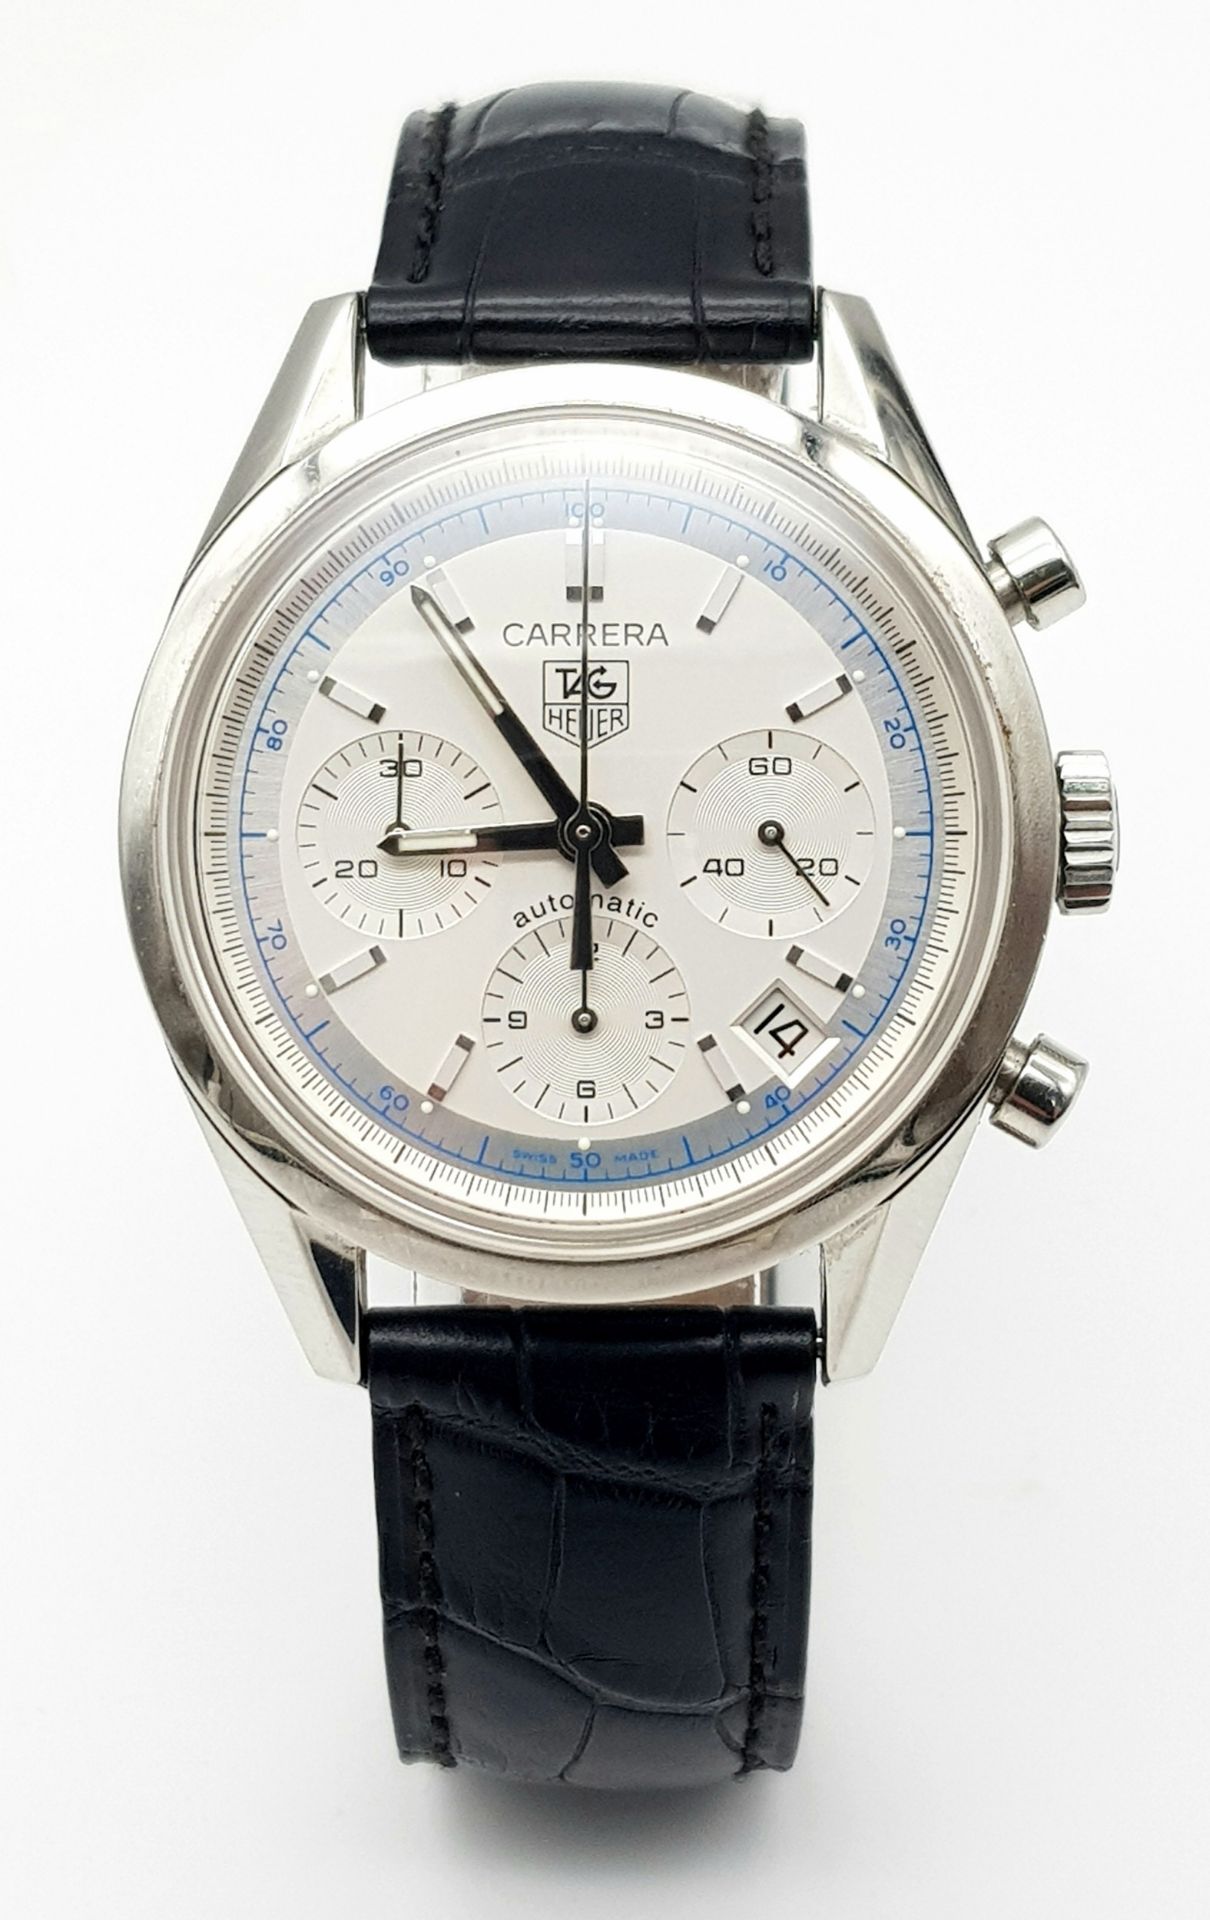 A Tag Heuer Carrera Automatic Chronograph Gents Watch. Black leather Tag strap. Stainless steel case